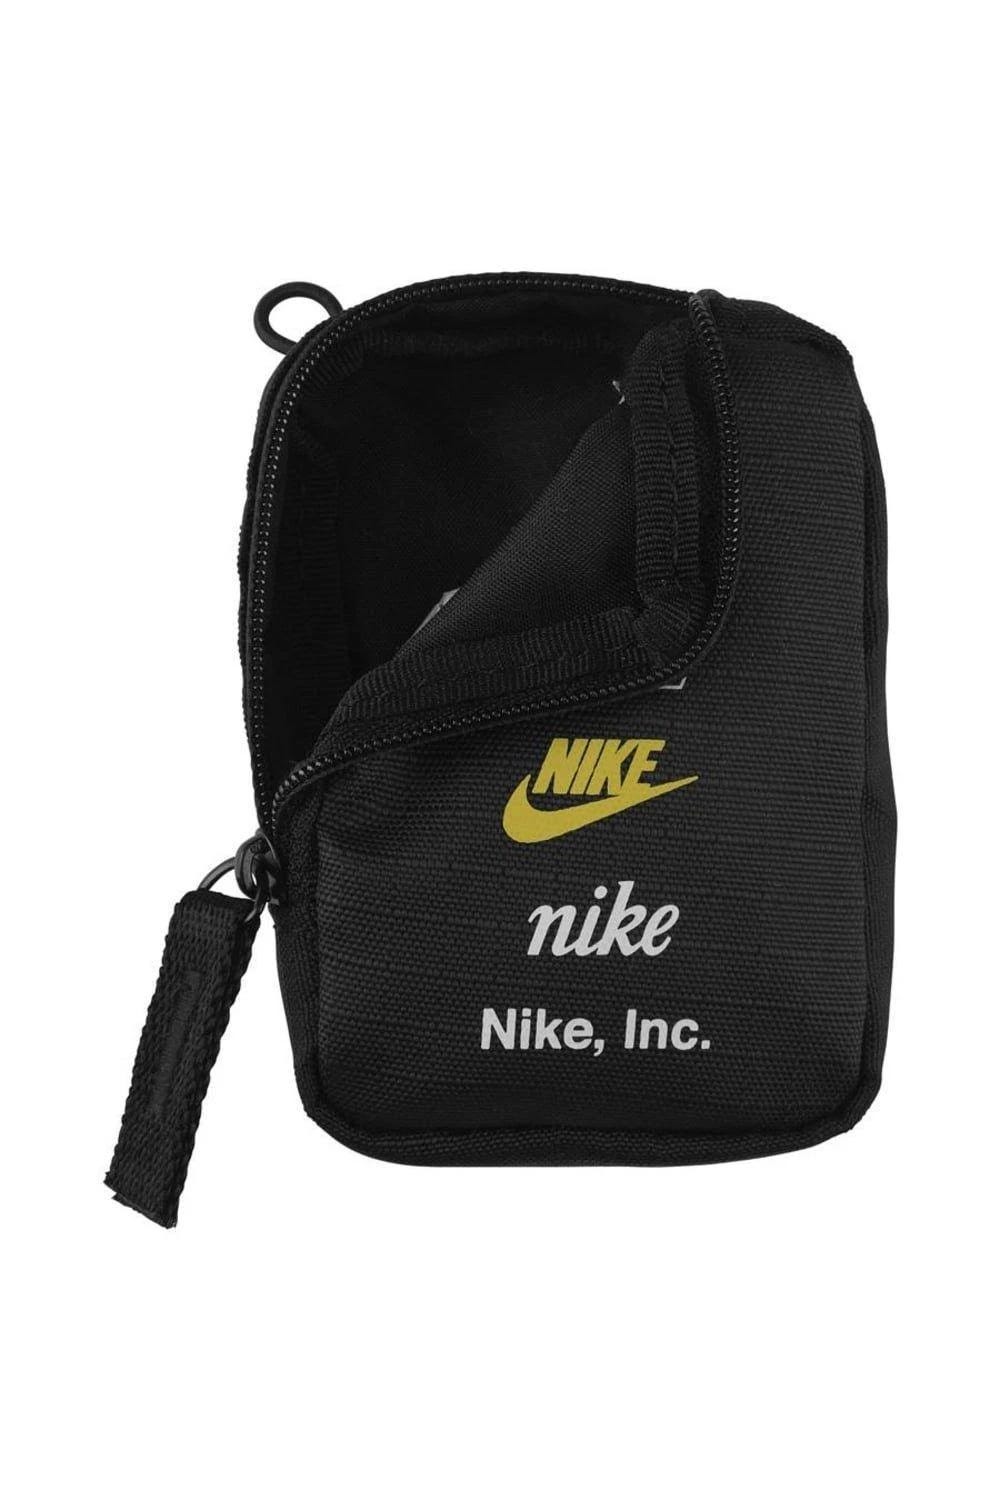 Nike HBR Lanyard Pouch for Adults: Logo & Text Design & Comfortable Quick Release Fastening | Image